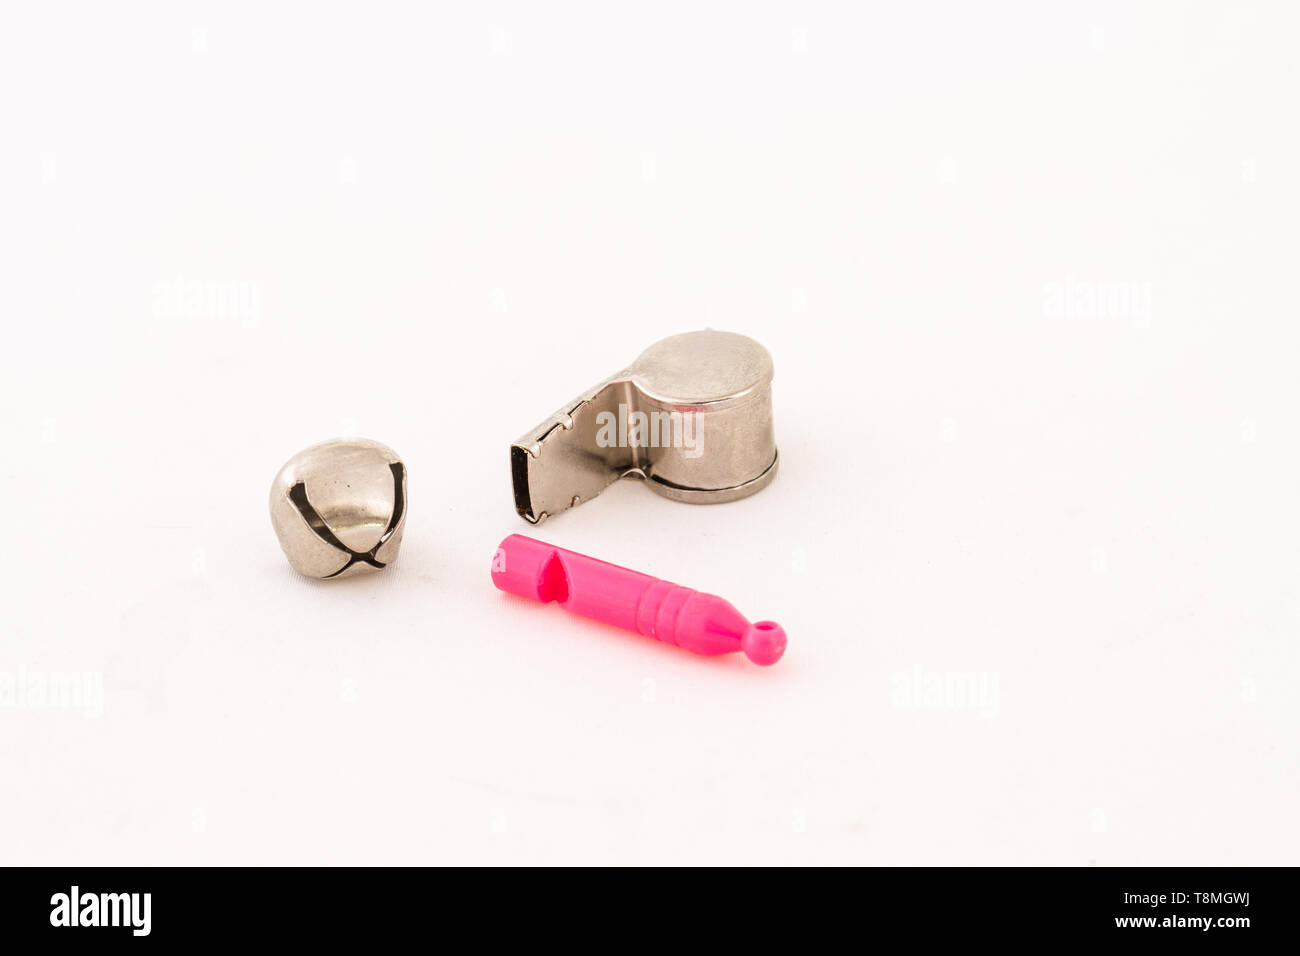 Two whistles and a silver bell isolated on a white background image with copy space in landscape format Stock Photo